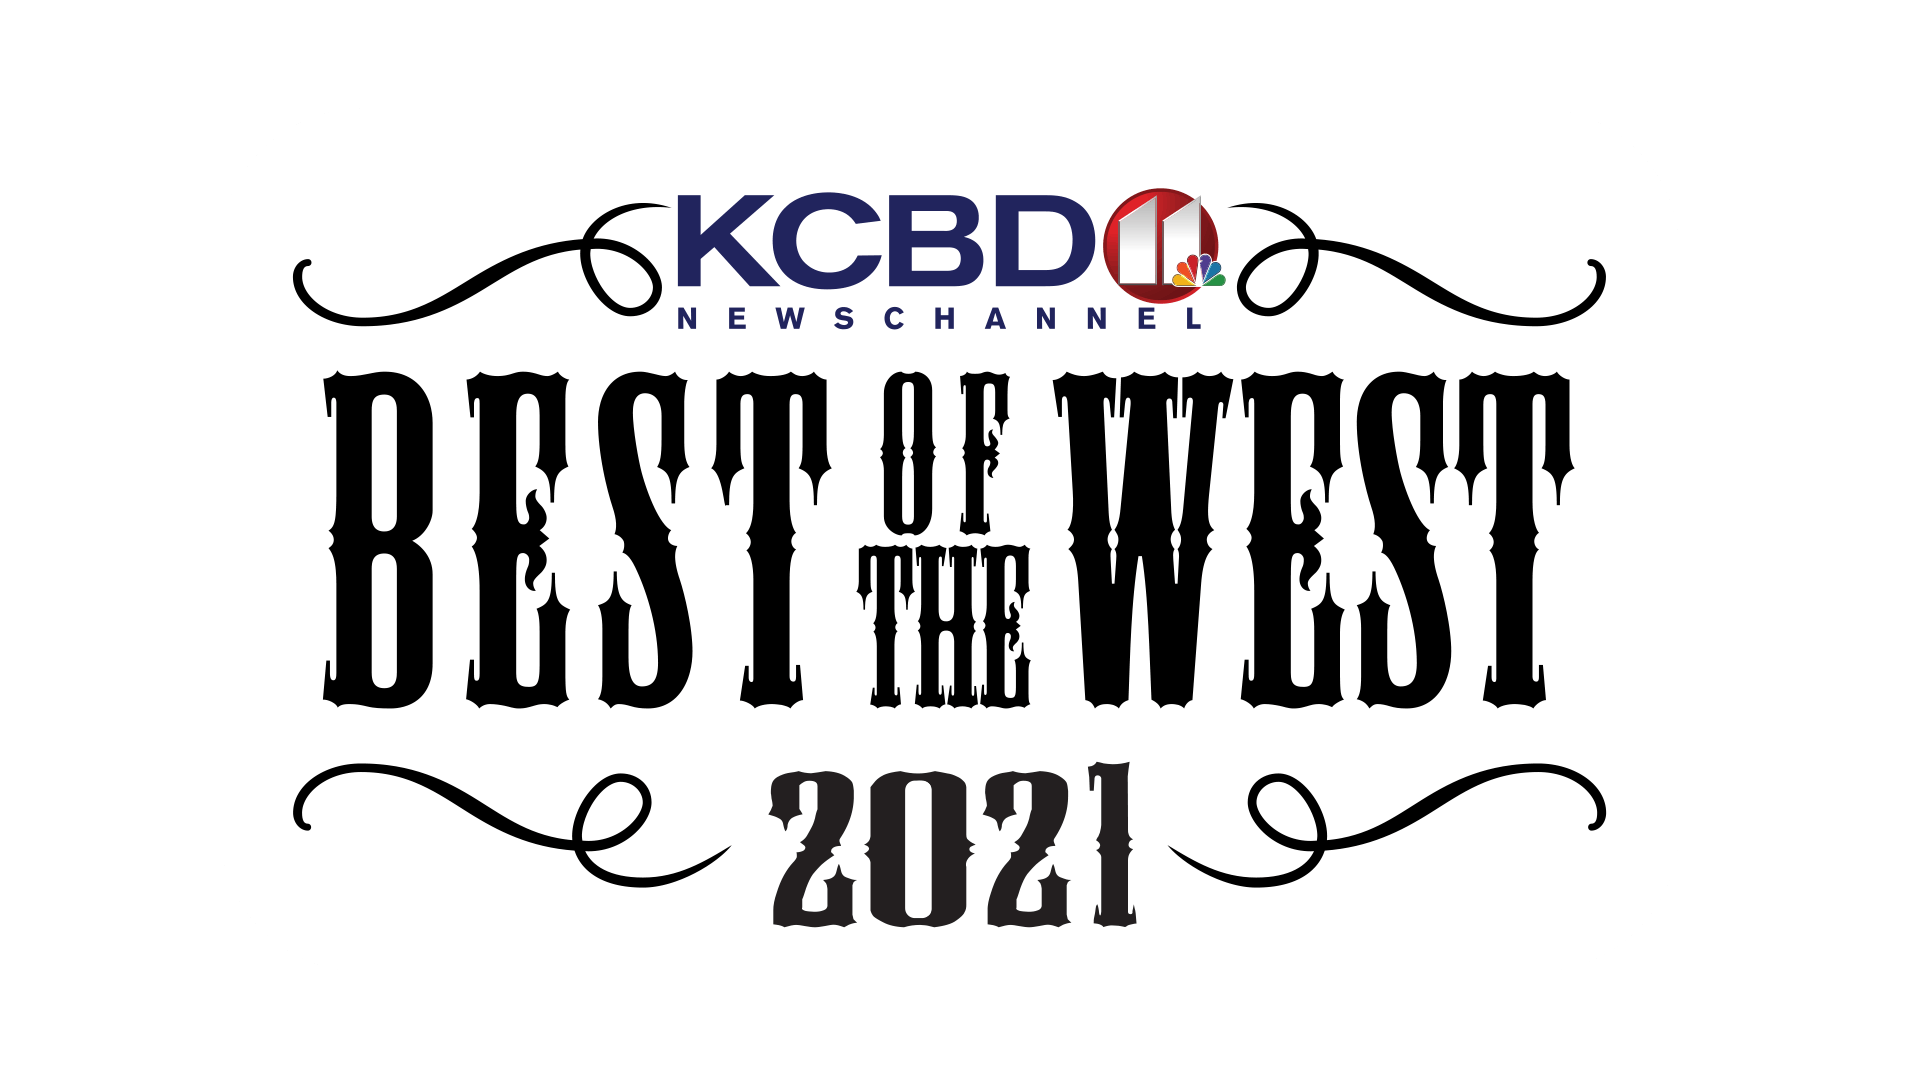 Best of the West 2021